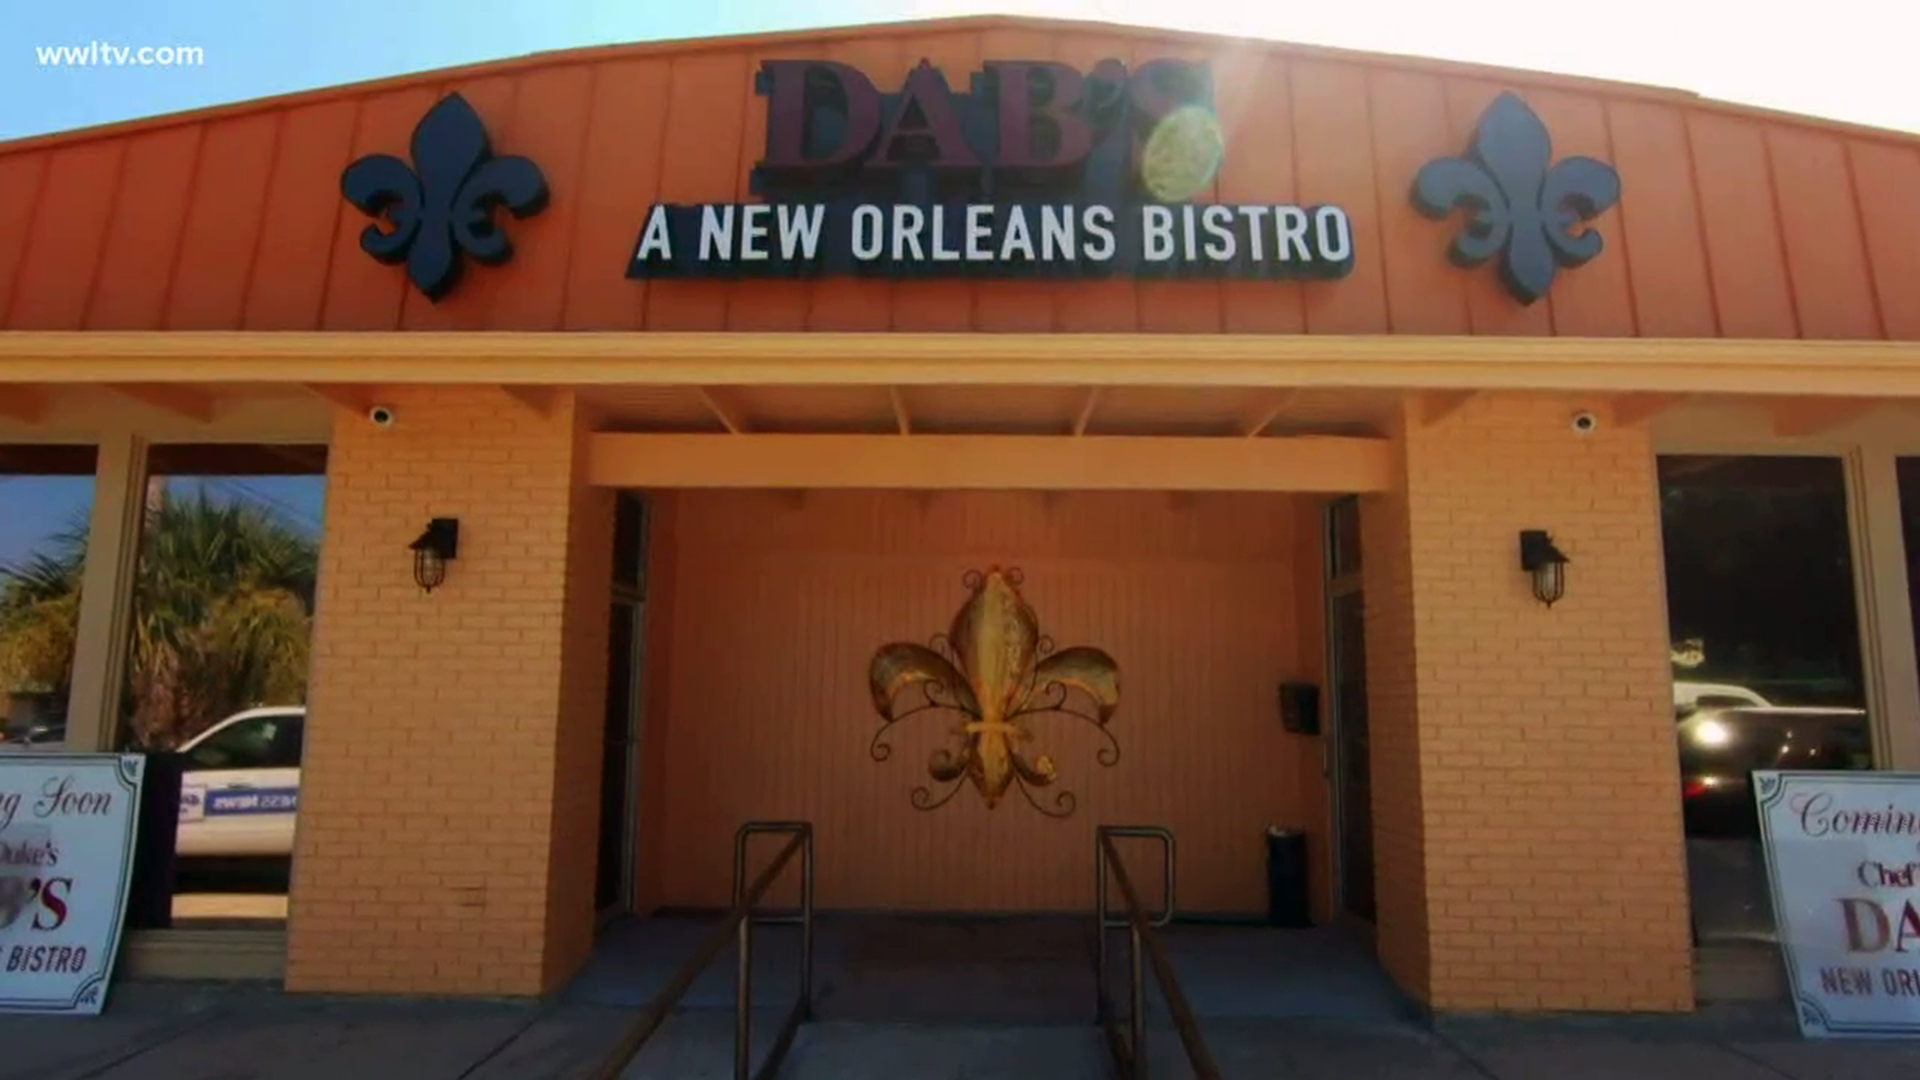 This is Dab's, Metairie's newest neighborhood restaurant. It's about to make its debut with some of Chef Duke LoCicero's dishes that made him famous at Cafe Giovanni